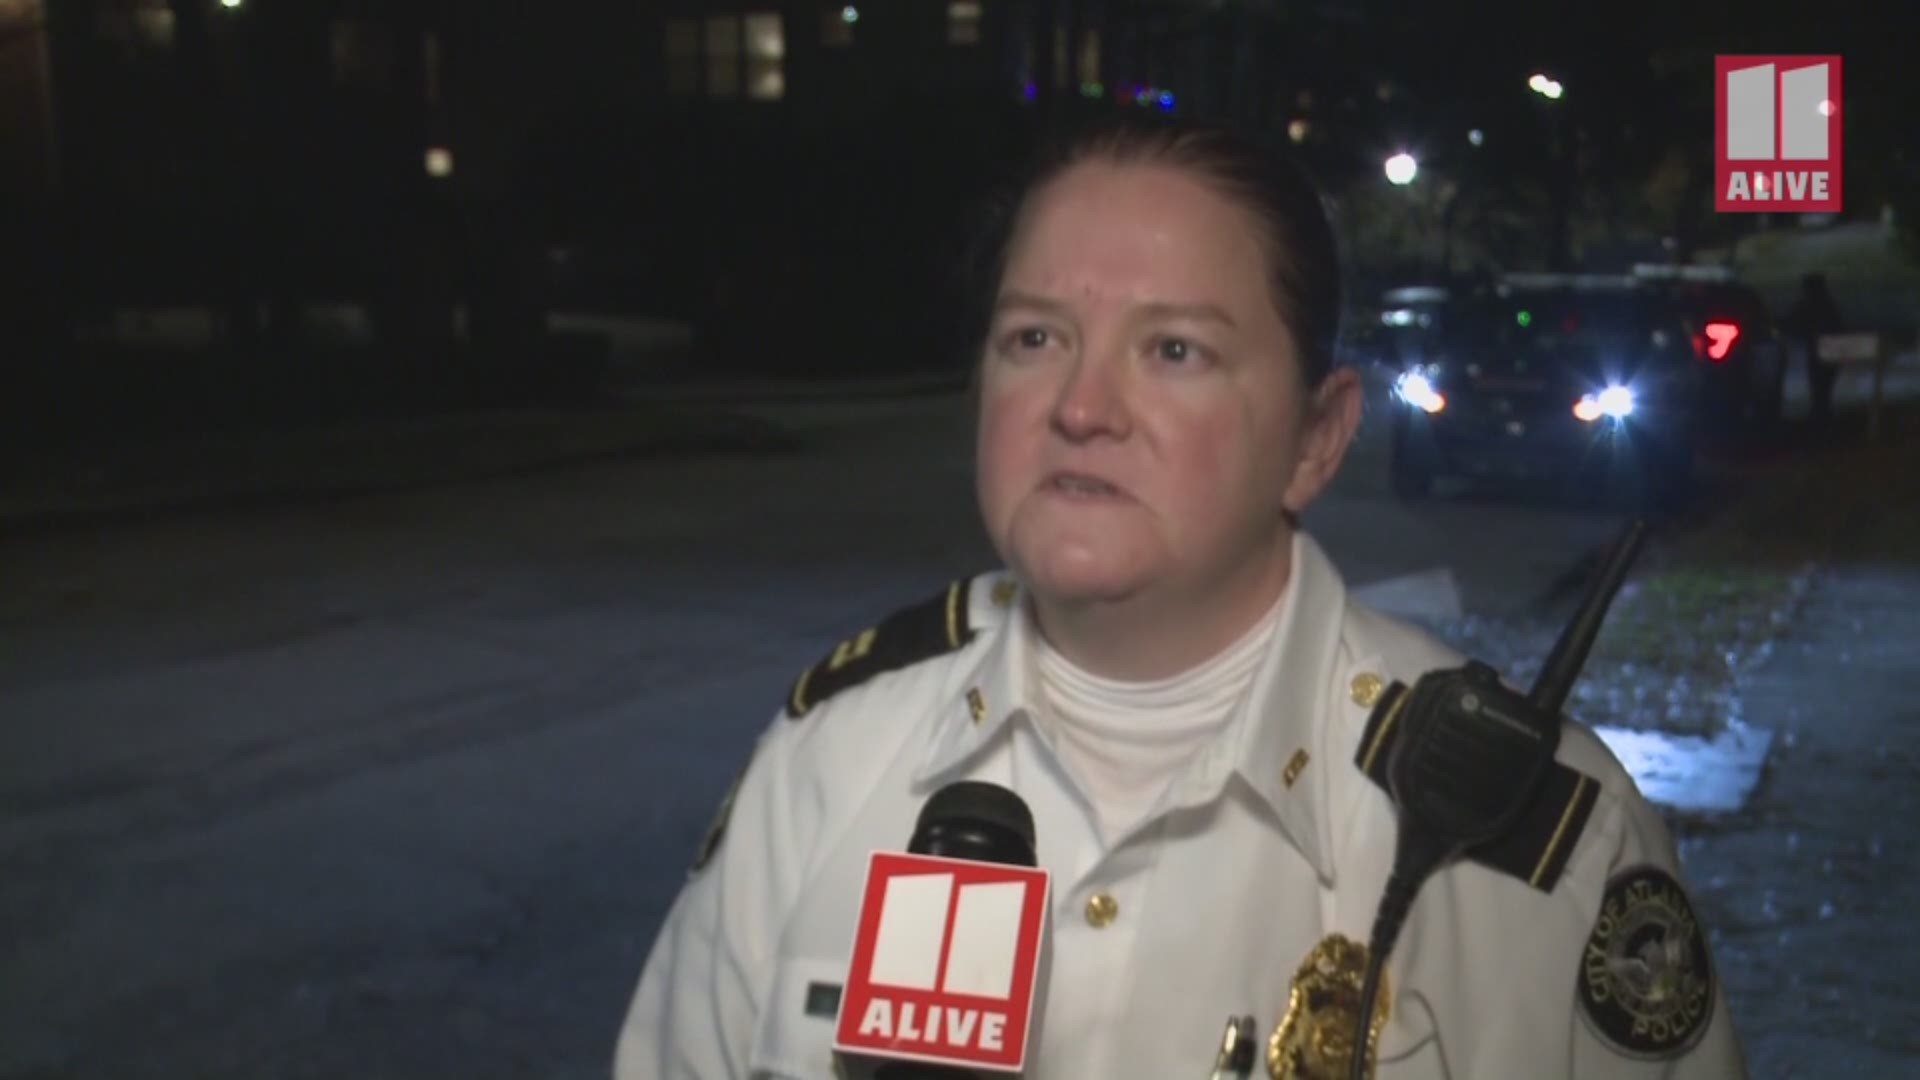 Captain Jessica Bruce tells us more about the shooting that injured an 11-year-old and 18-year-old in Atlanta late Saturday evening.